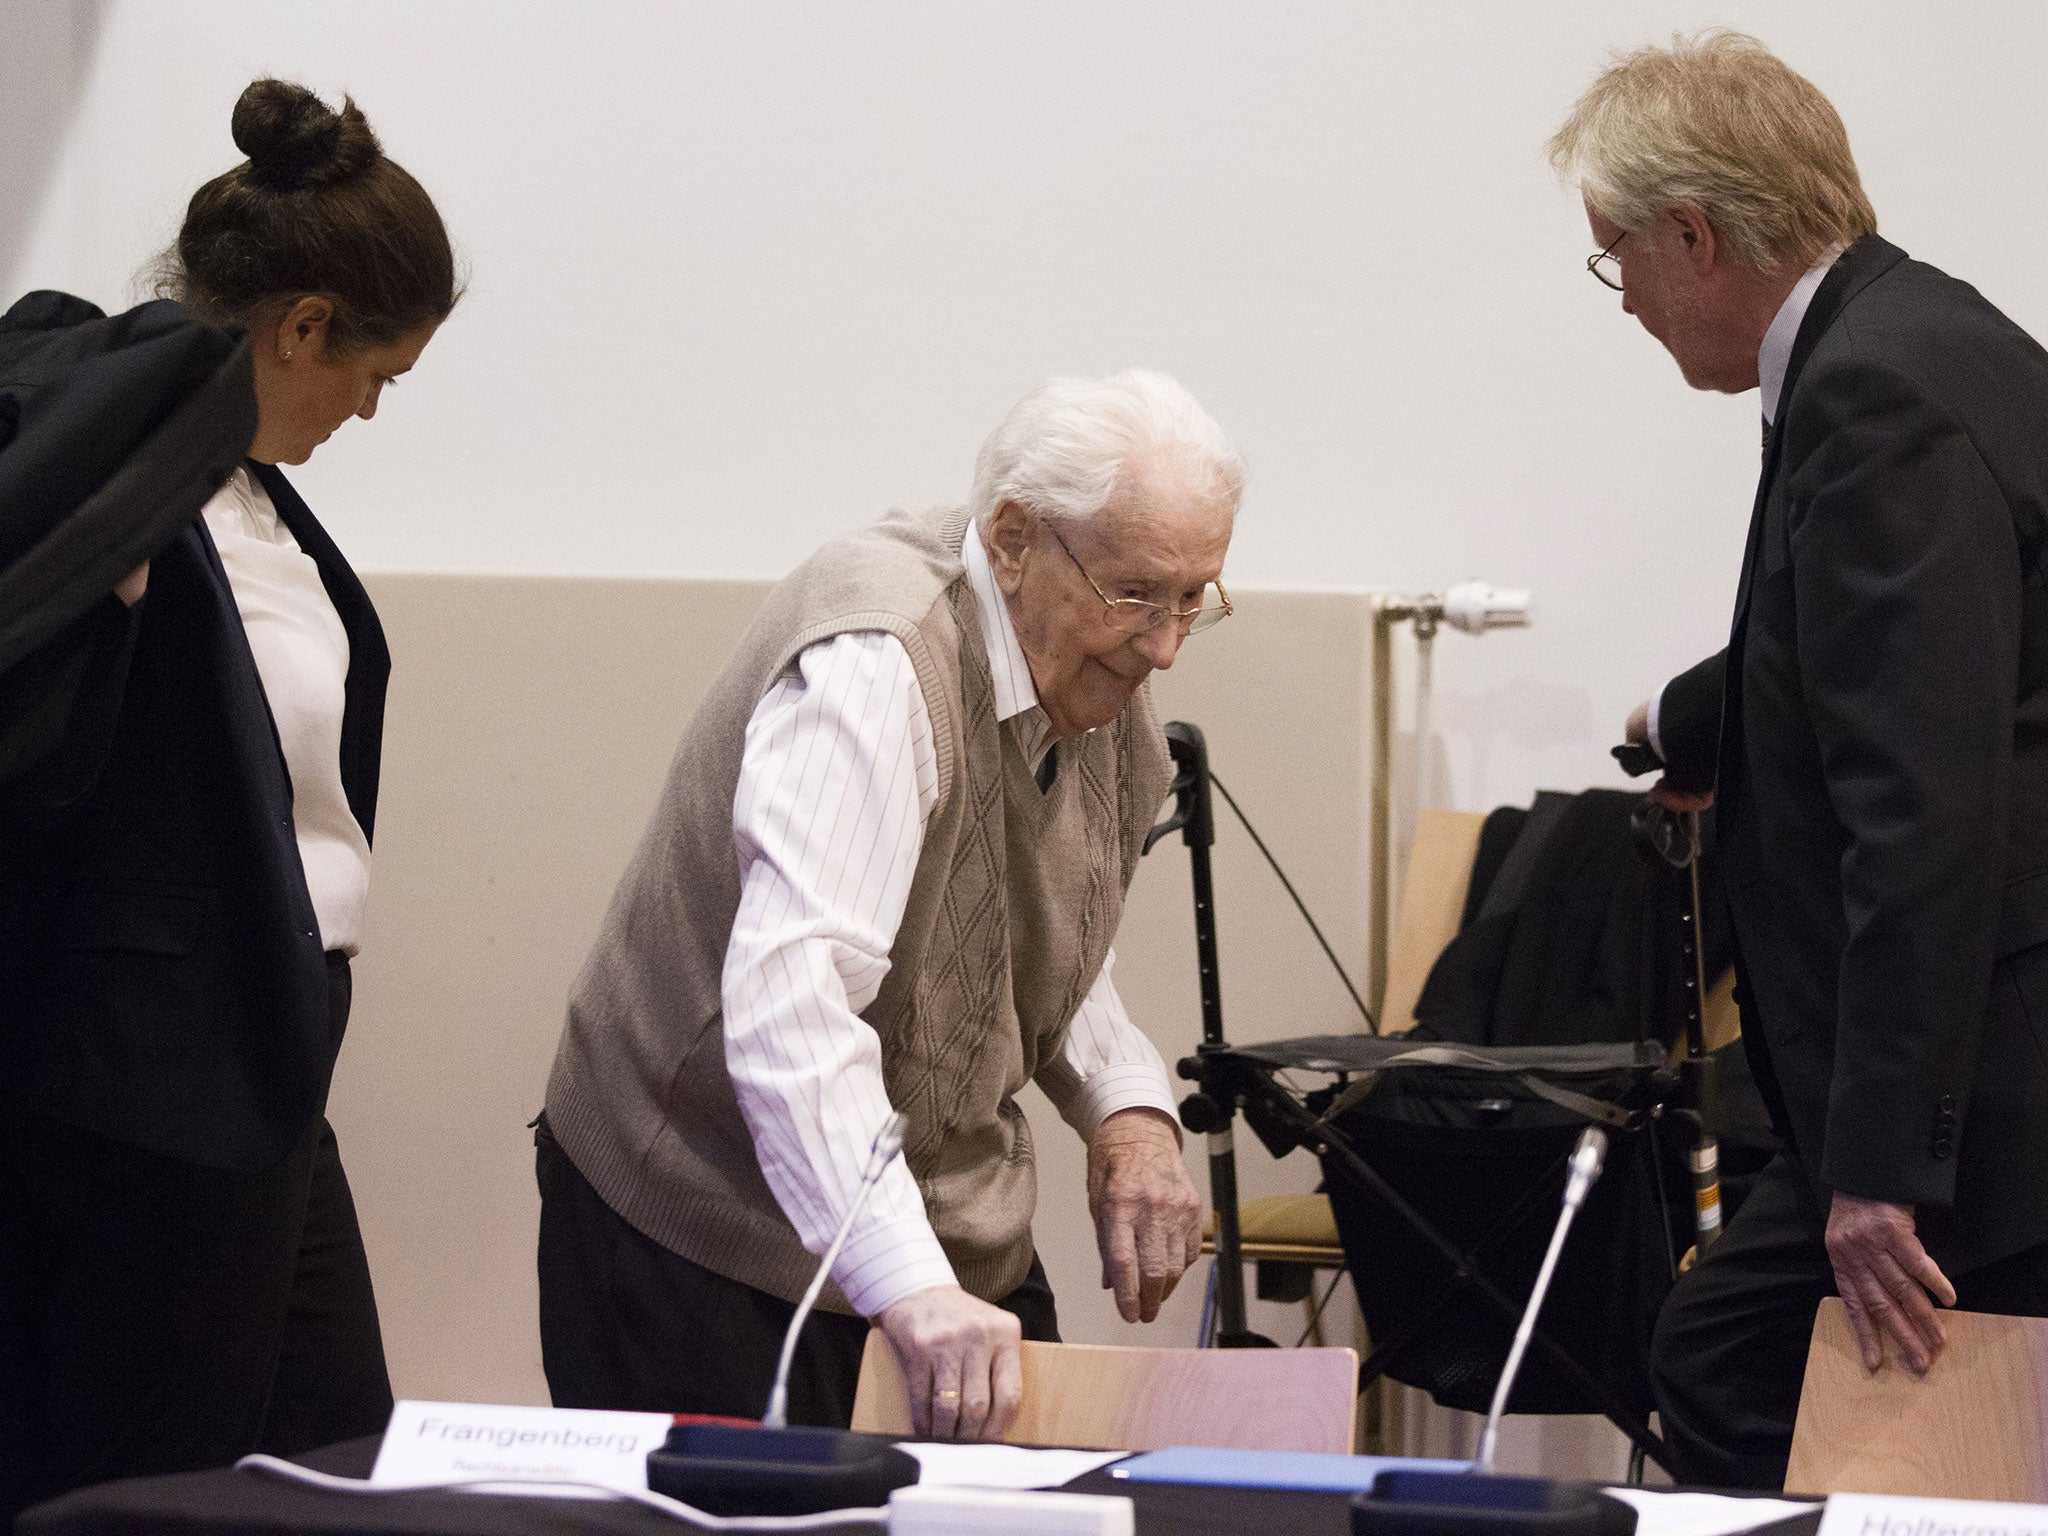 Oskar Groening, 93, arrives for the first day of his trial to face